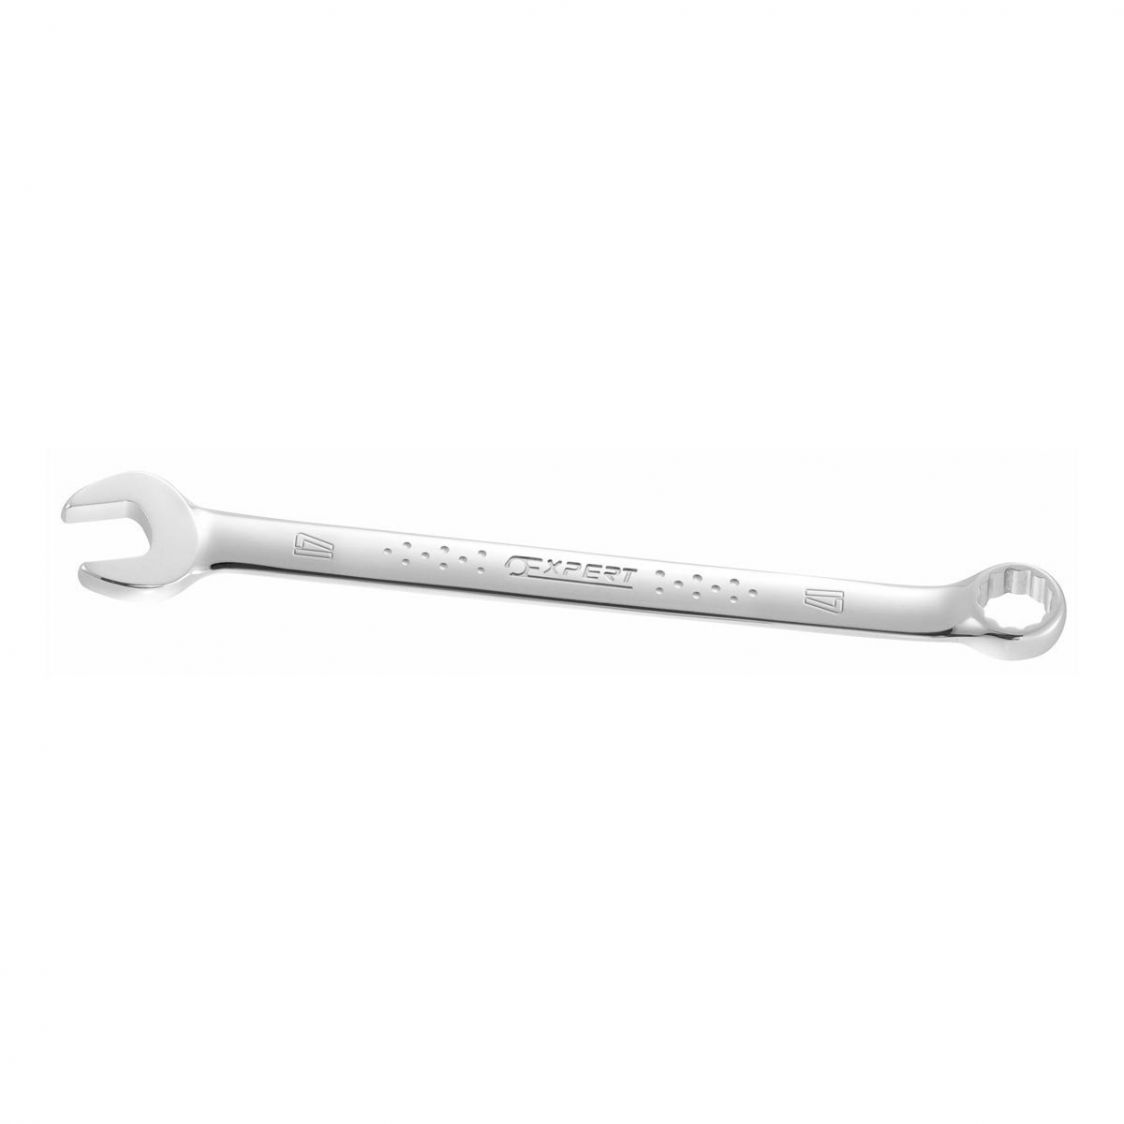 EXPERT by FACOM E110701 - 8mm Metric Long Combination Spanner